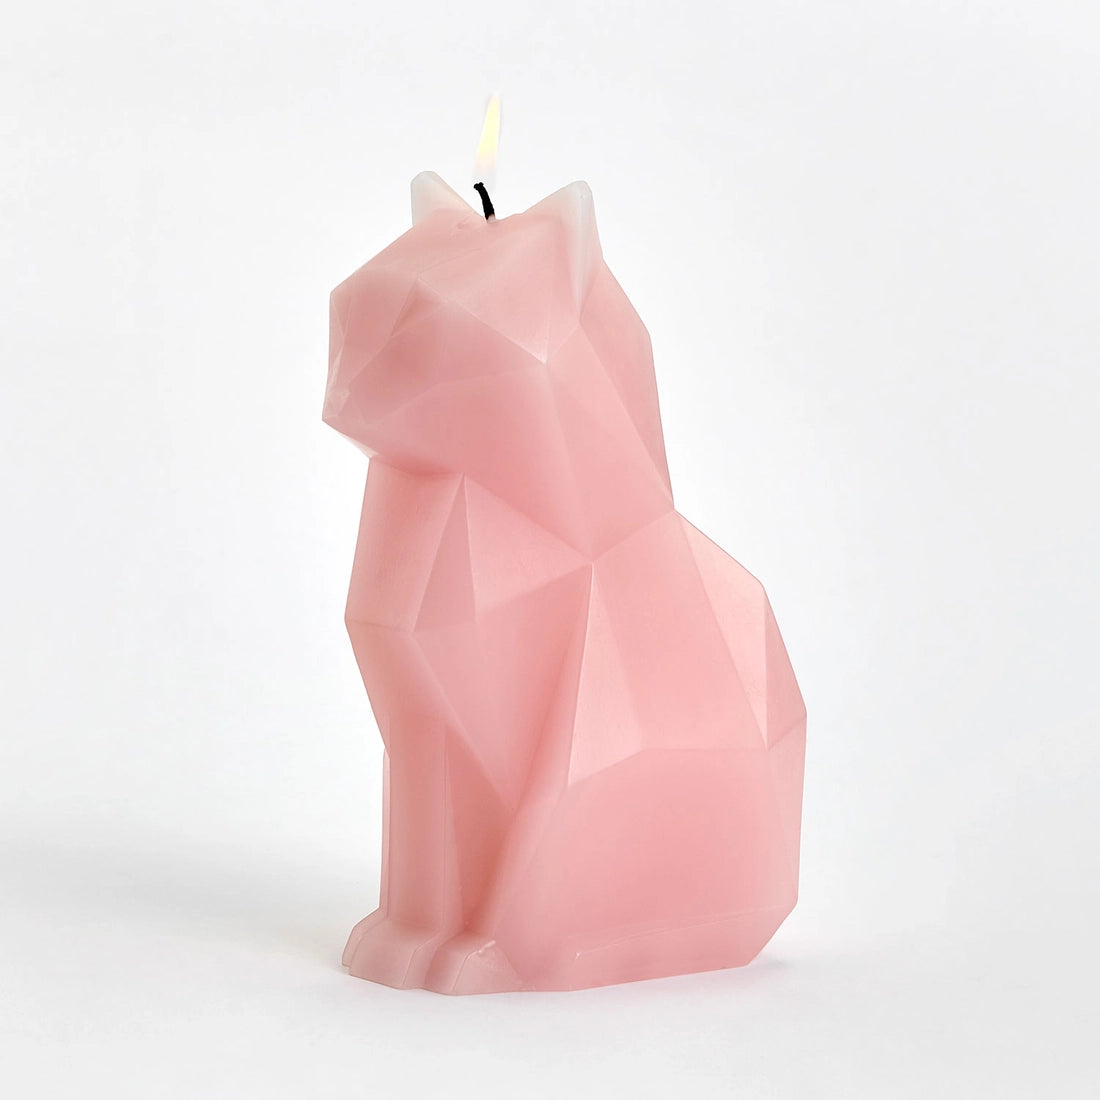 PyroPet Kisa Cat Candle in Light Pink